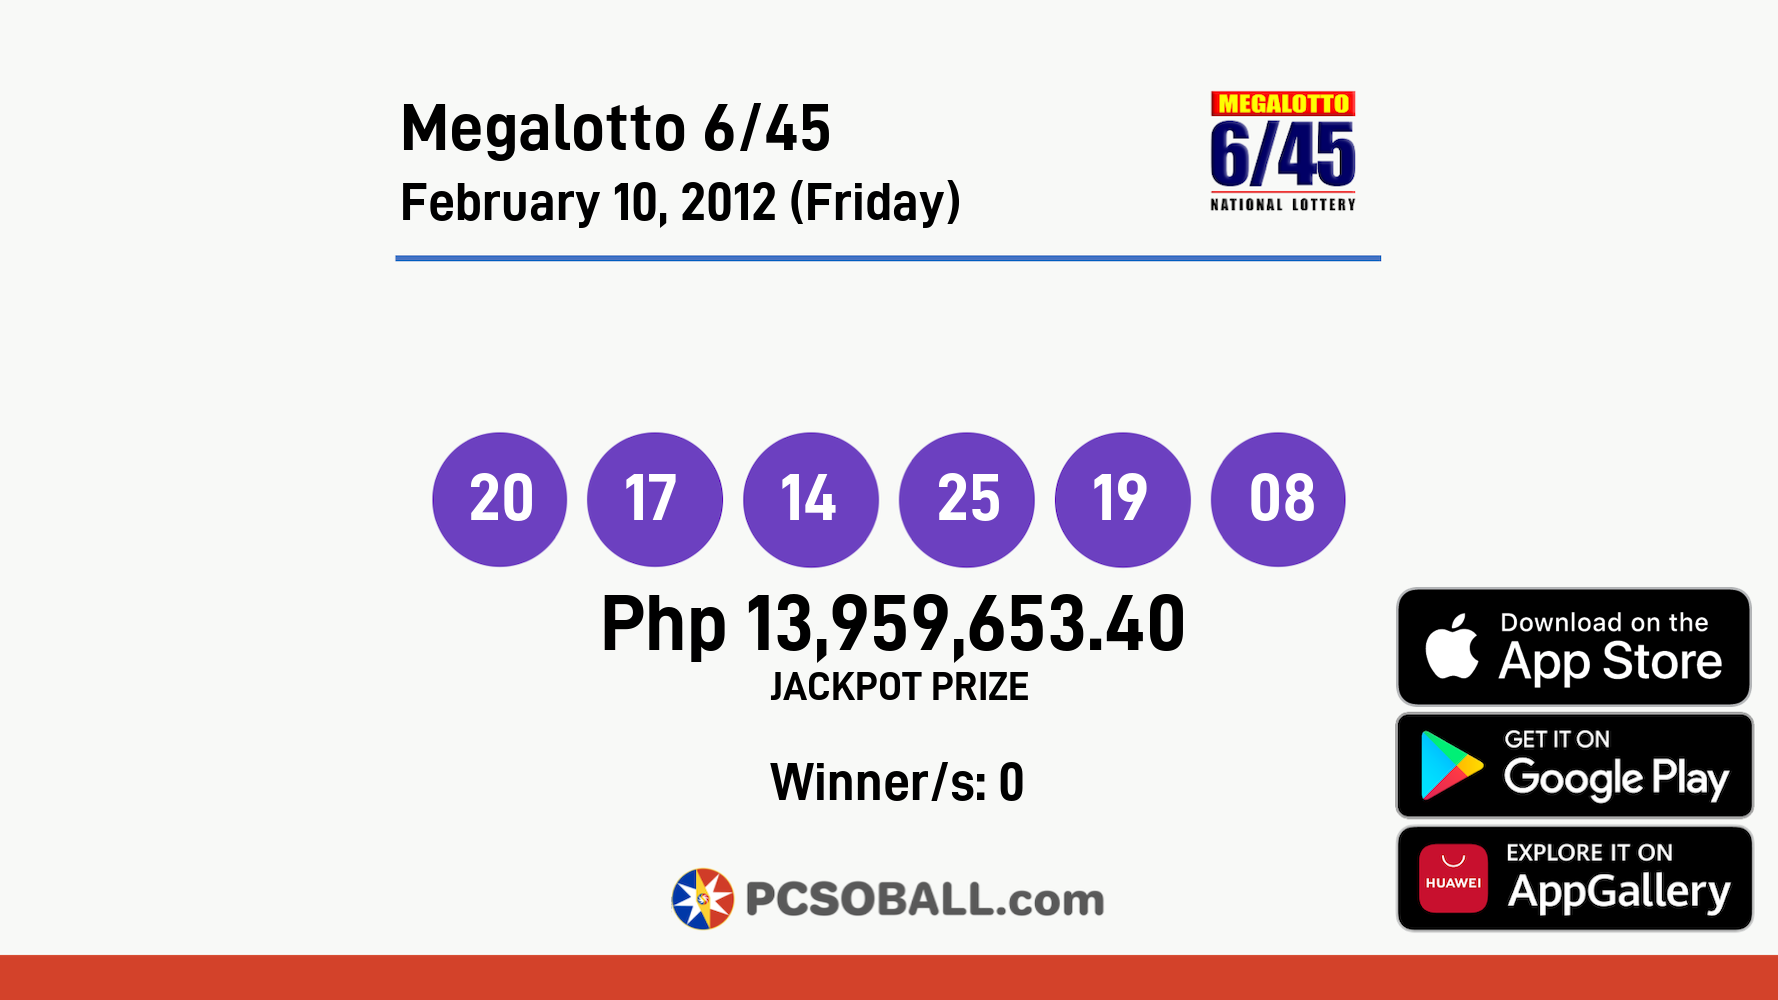 Megalotto 6/45 February 10, 2012 (Friday) Result